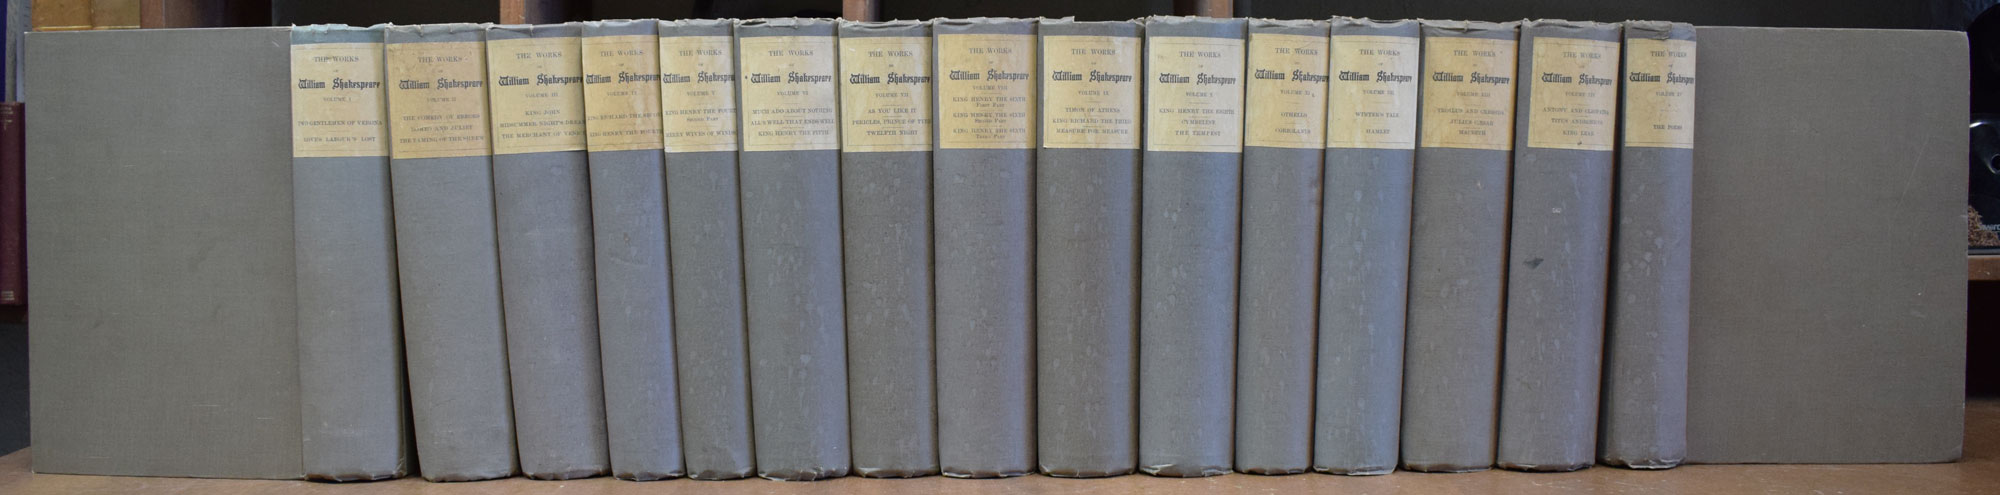 The Works of William Shakespeare. 15 Volume set. Routledge deluxe limited edition.